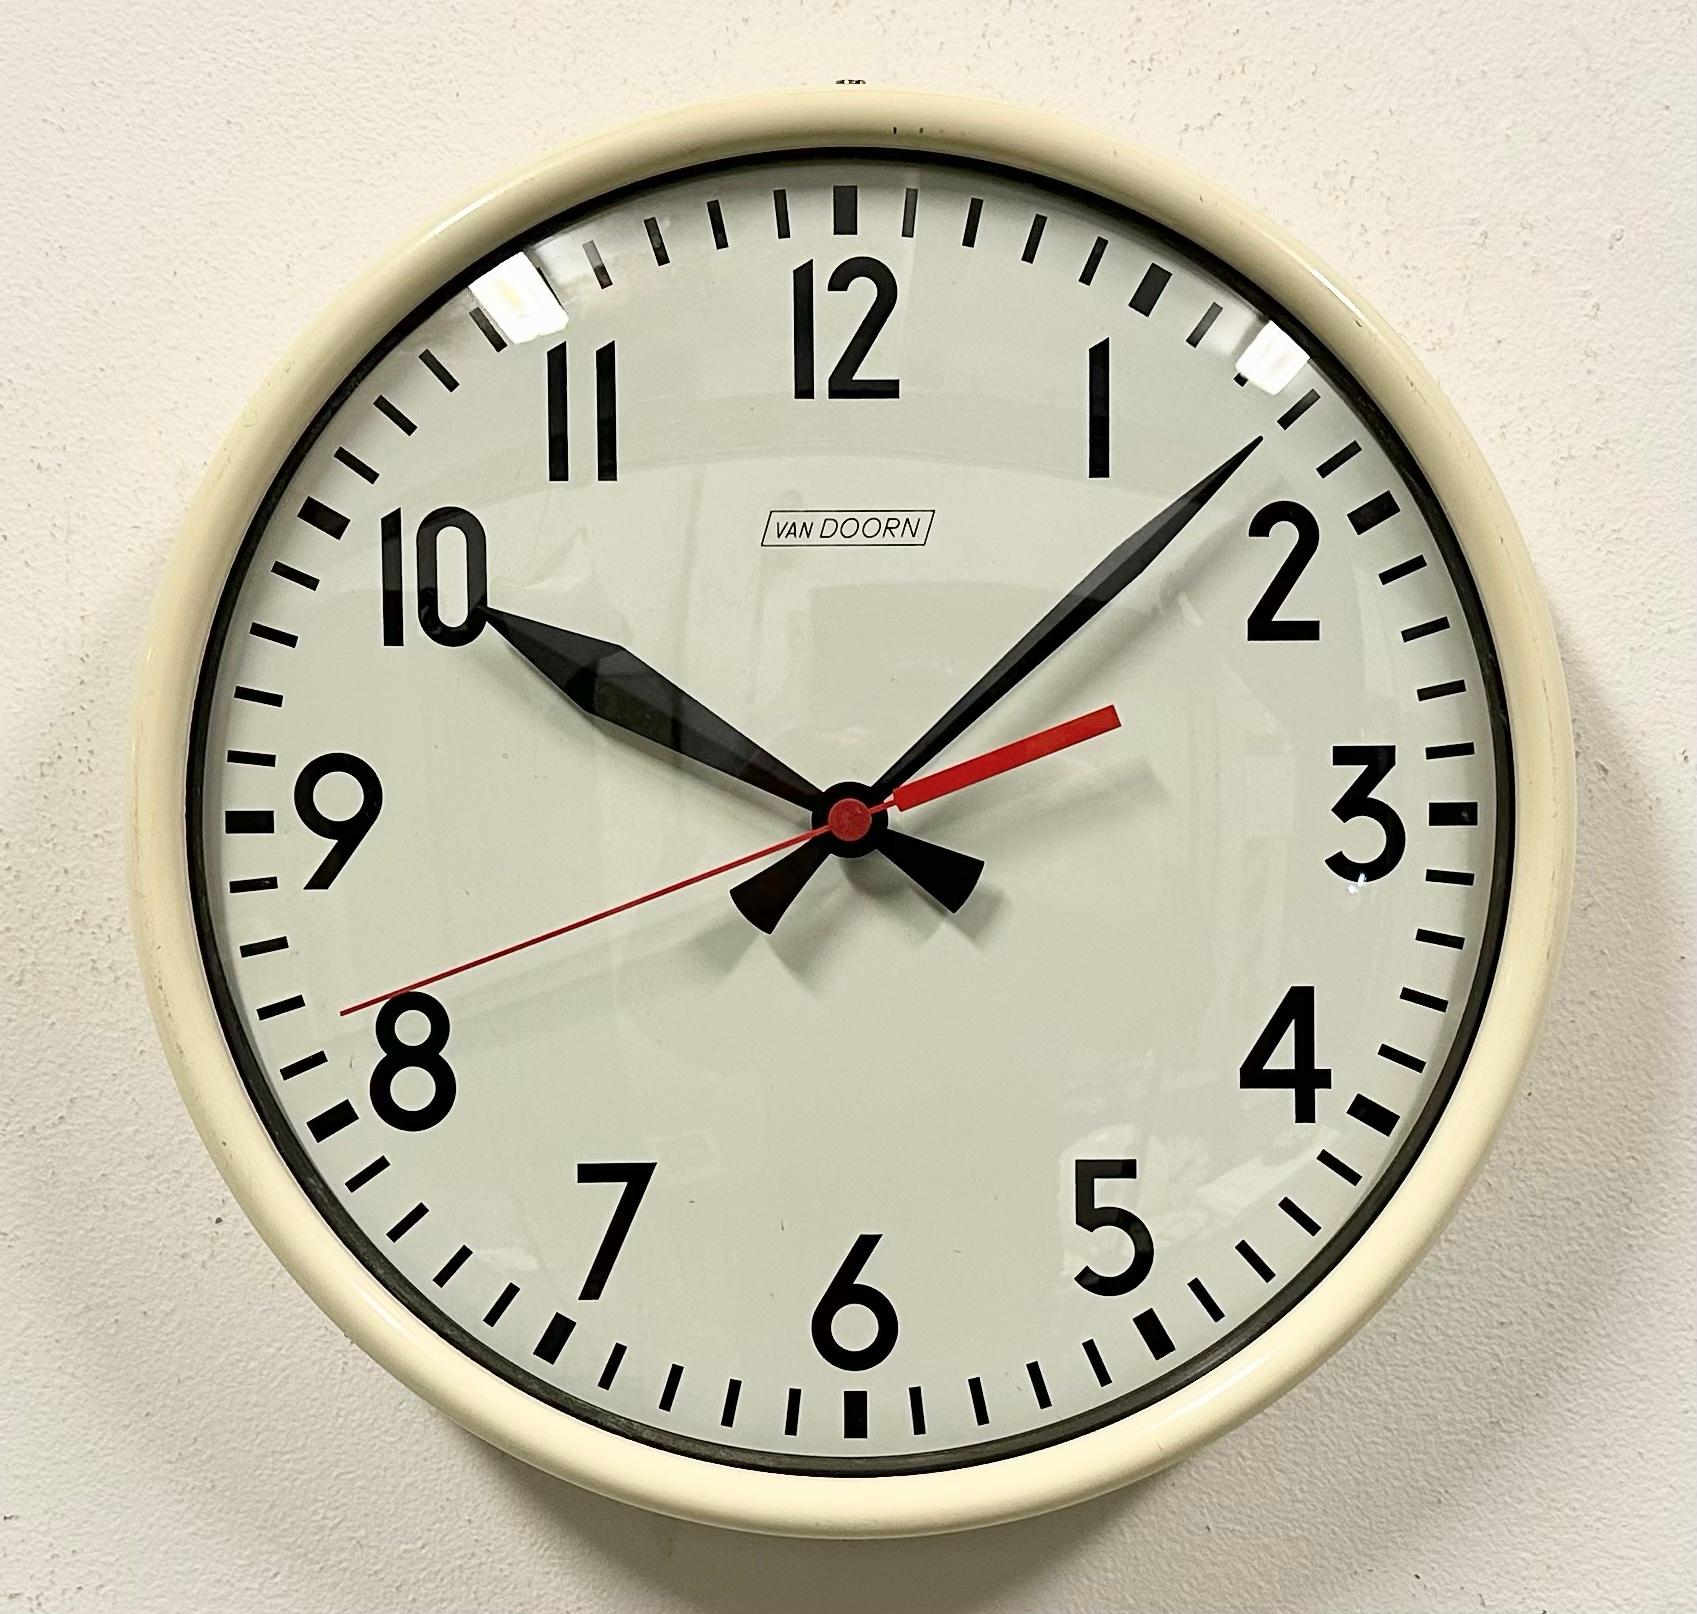 This wall clock was produced by Van Doorn in Netherlands during the 1960s. It features a beige iron frame, an iron dial, an aluminum hands and a curved clear glass cover. The piece has been converted into a battery-powered clockwork and requires